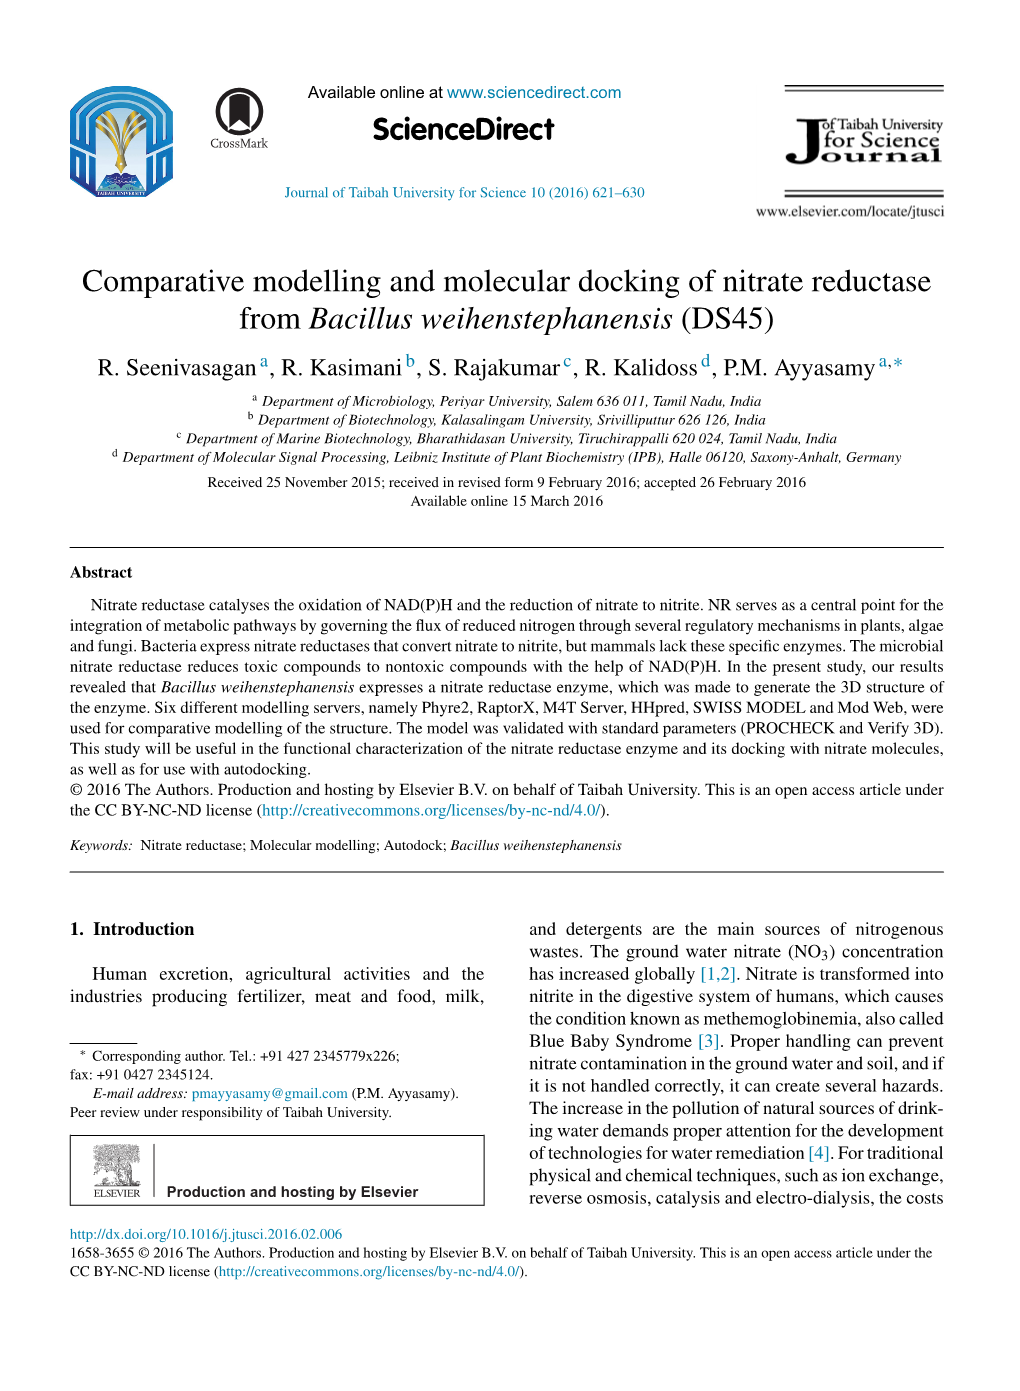 Comparative Modelling and Molecular Docking of Nitrate Reductase